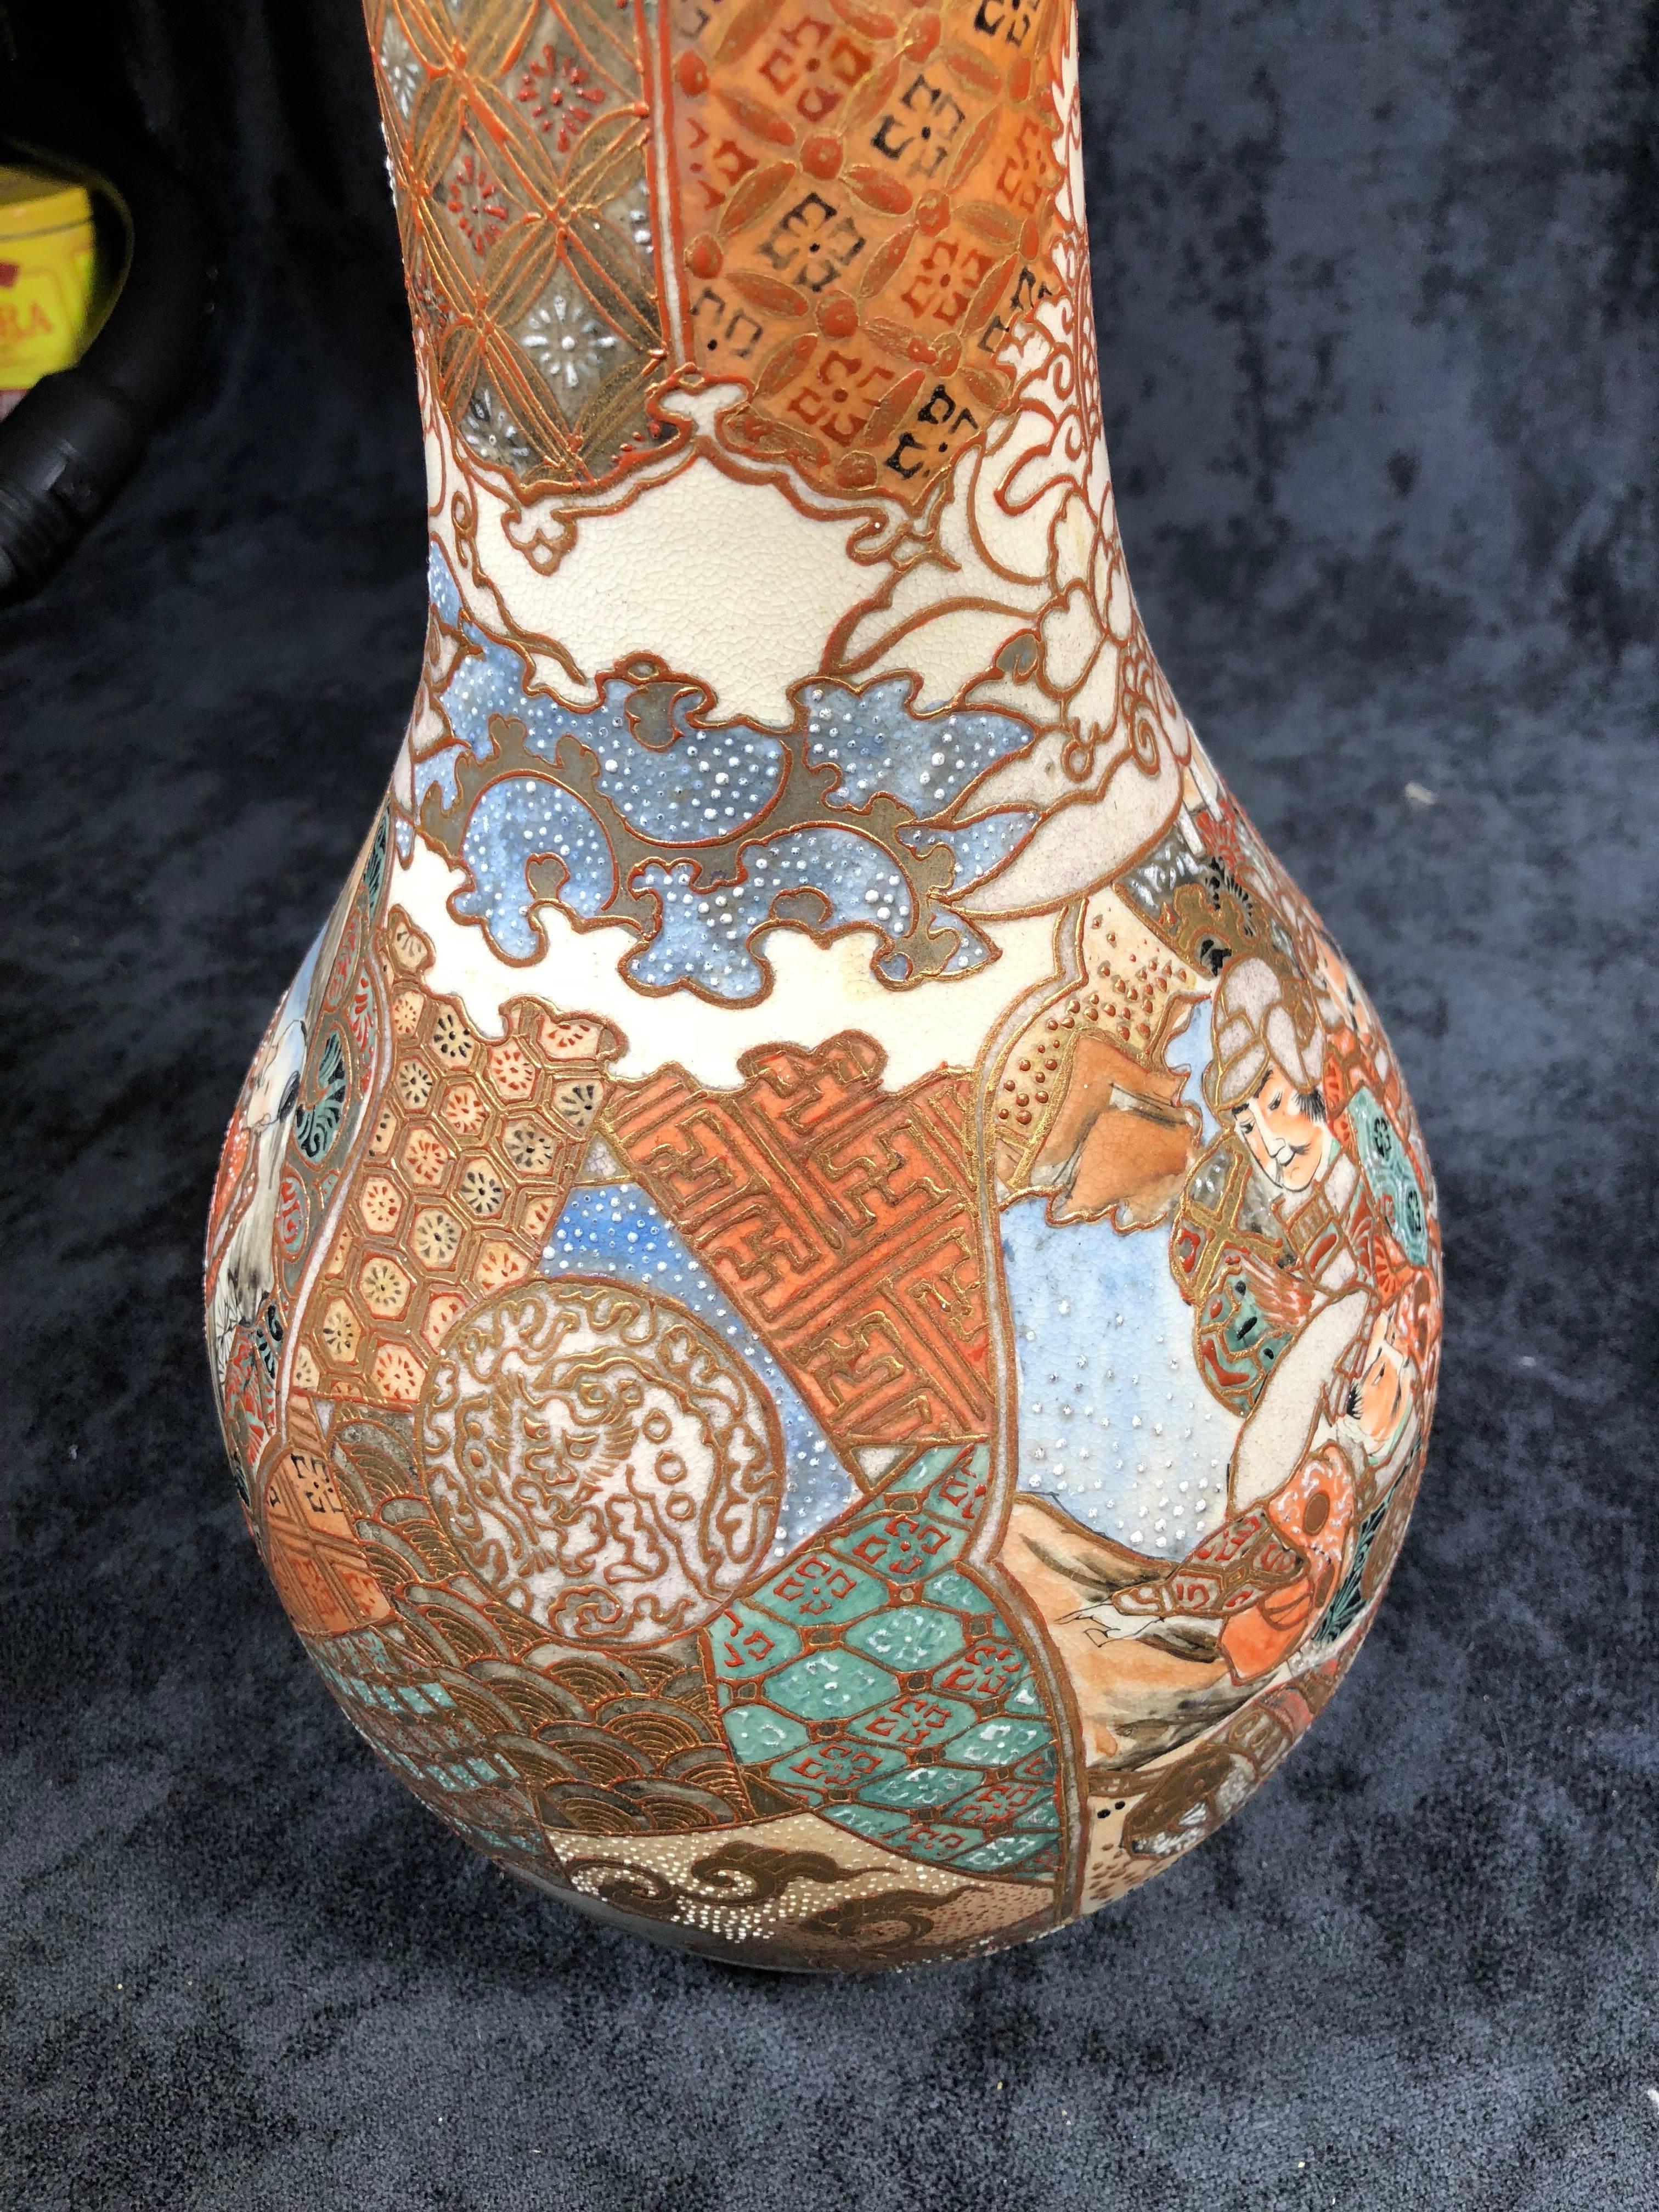 Very elegant and well decorated Japanese vase of the late 19th century Meiji period in the Satsuma fashion. Large sized approx 18 inches tall by 7 inches wide.